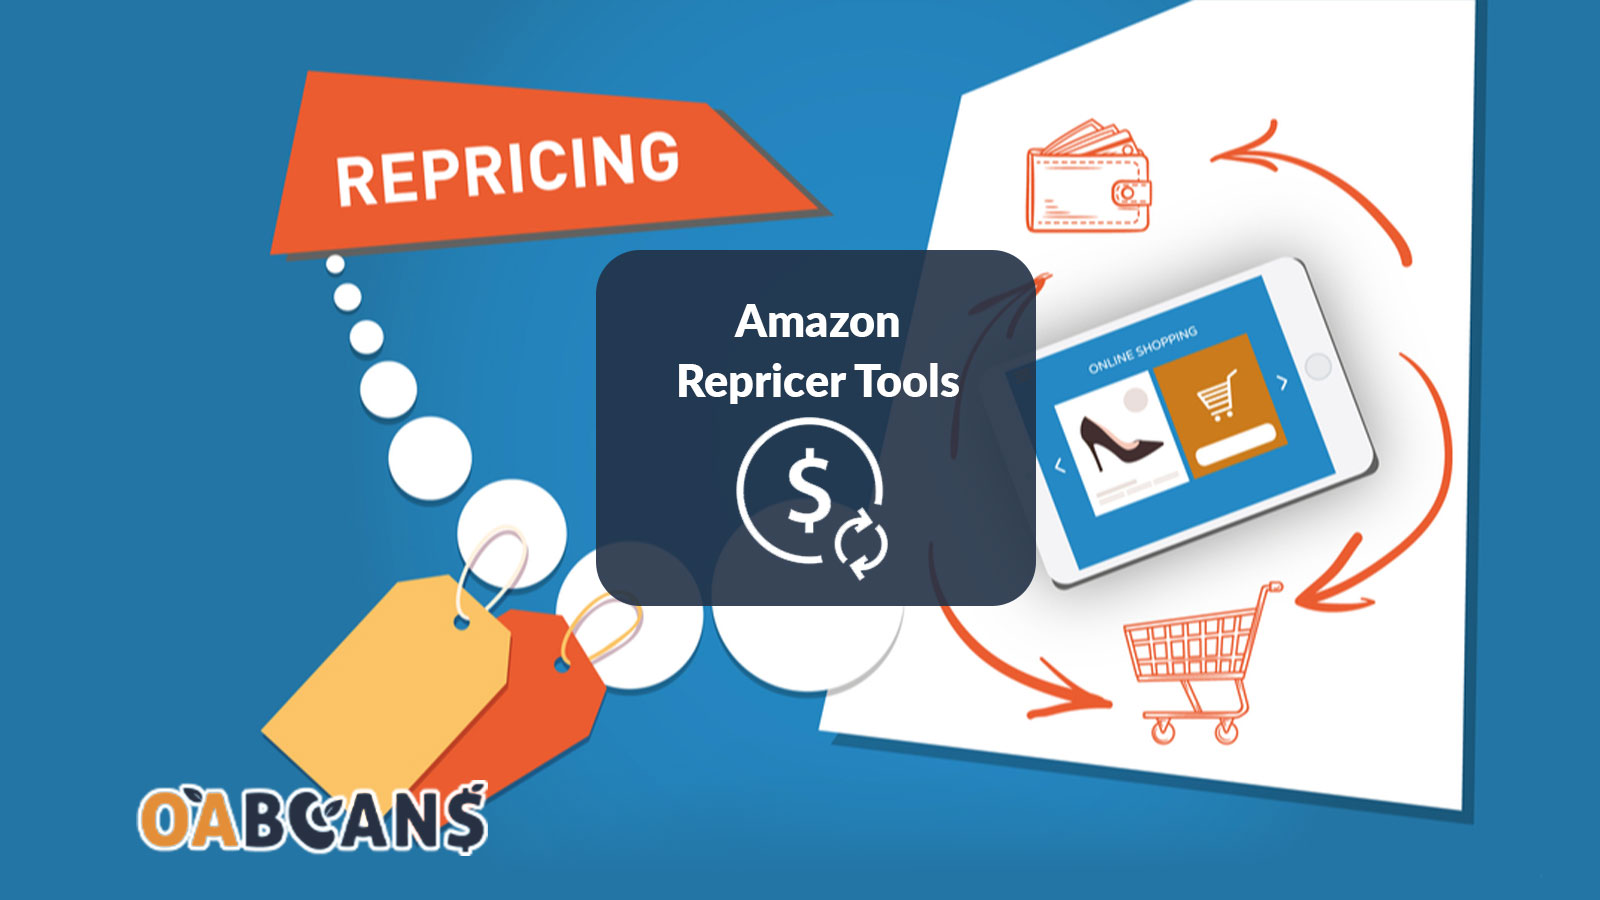 Using tools for repricing is better than do it manually.